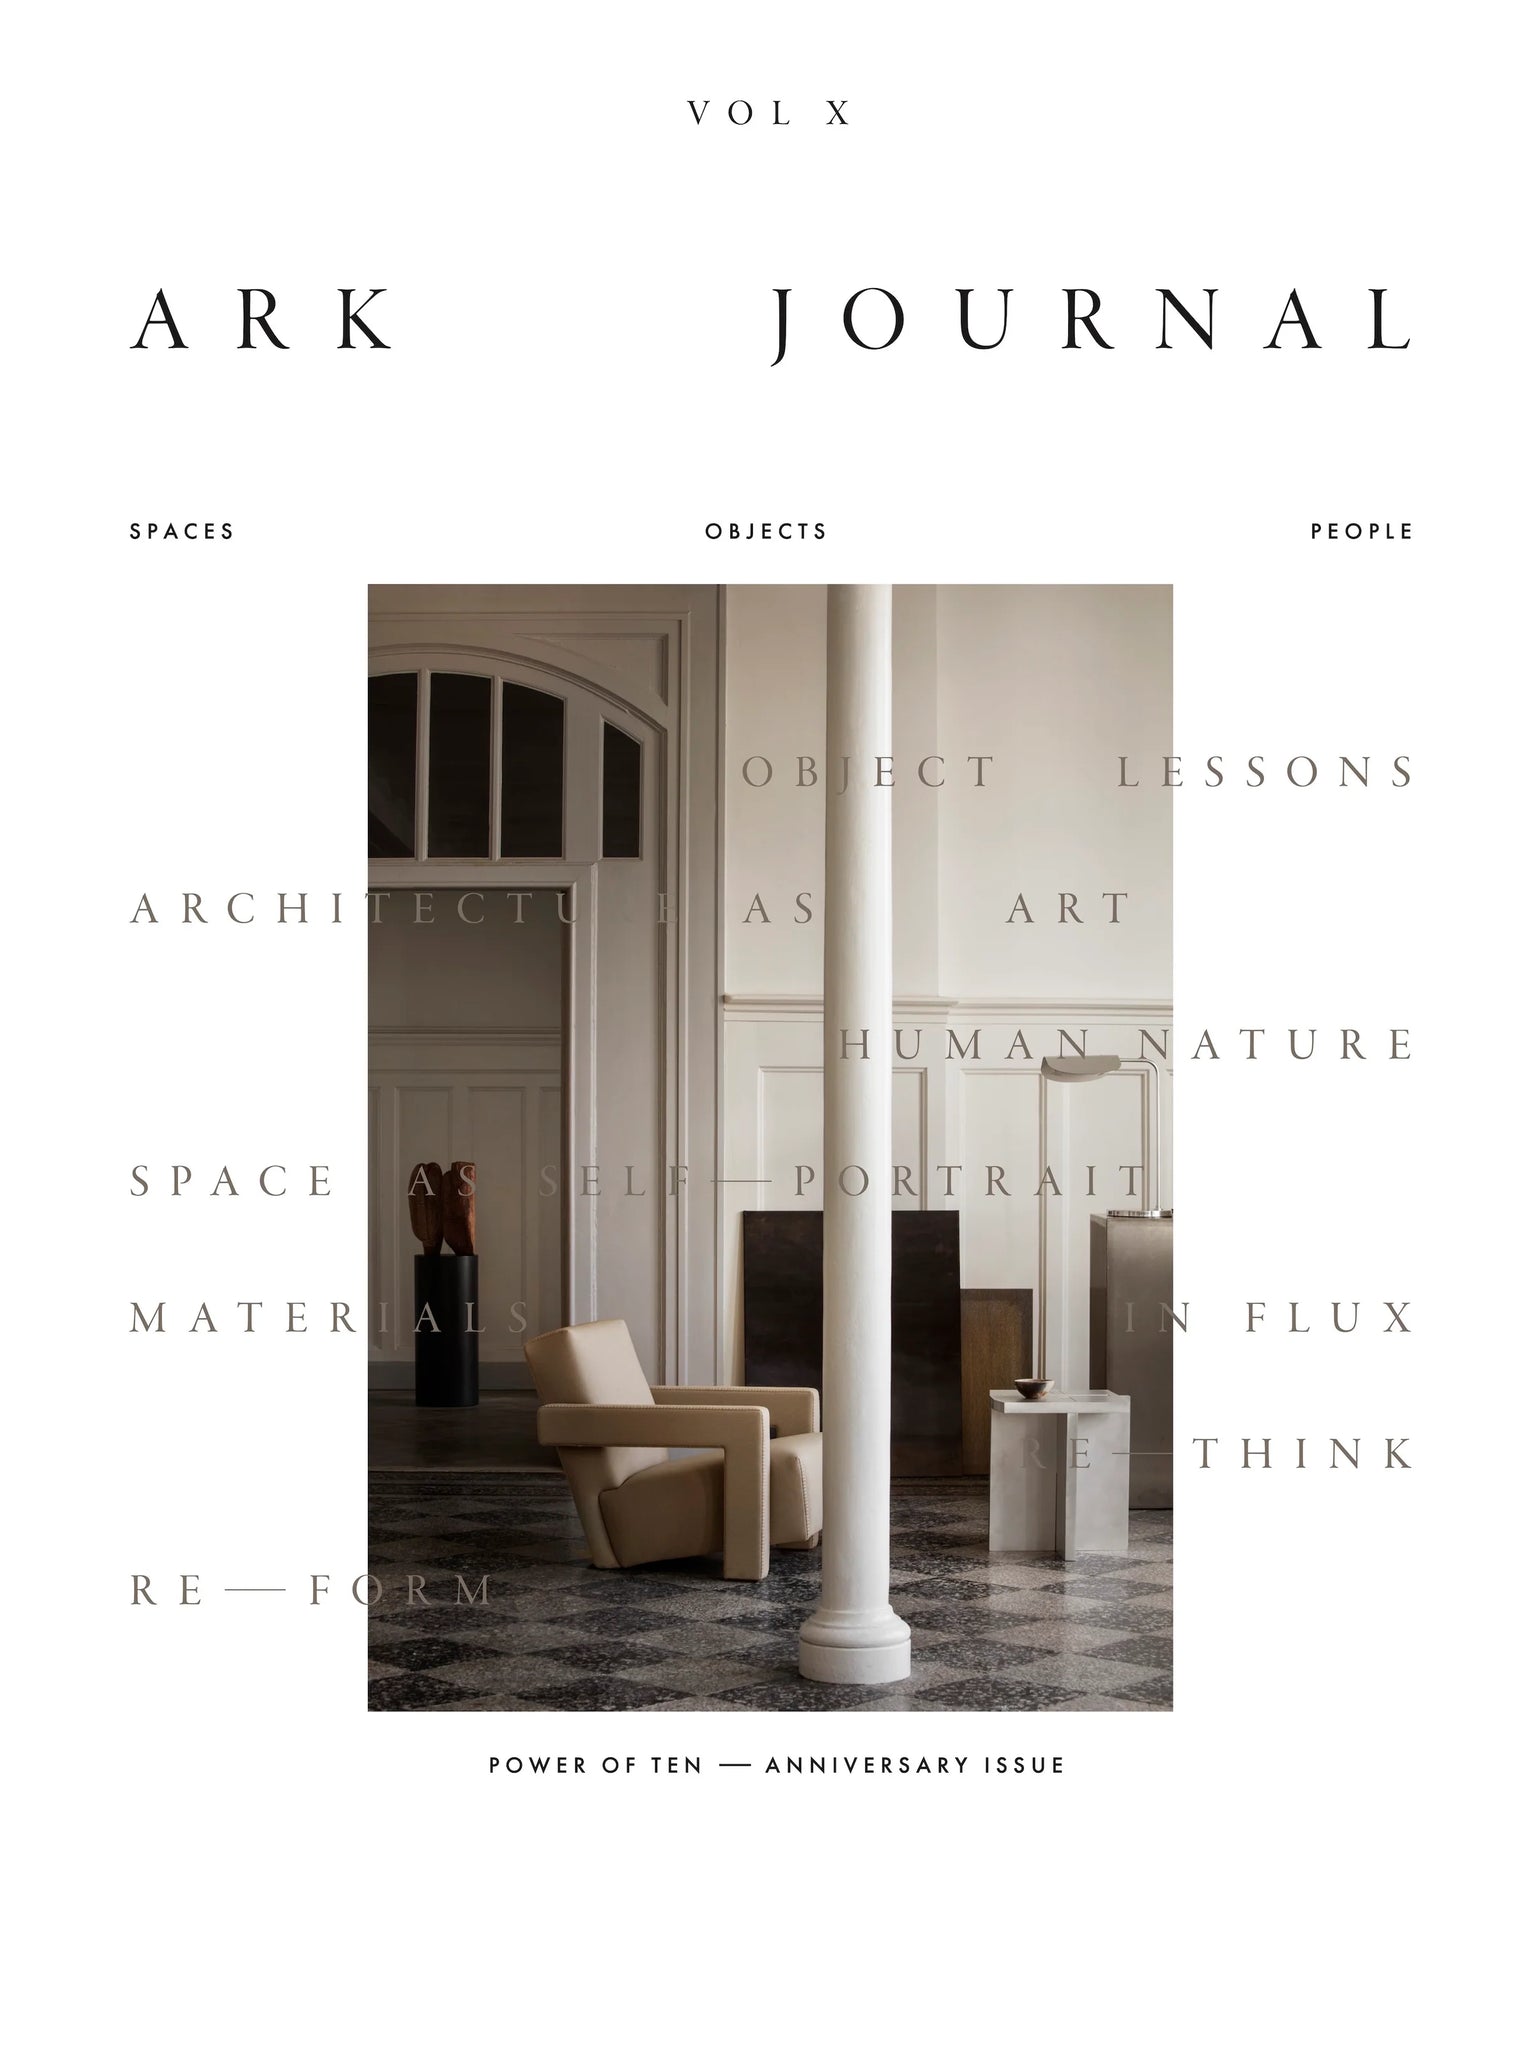 Ark Journal Vol. X in cover version 1